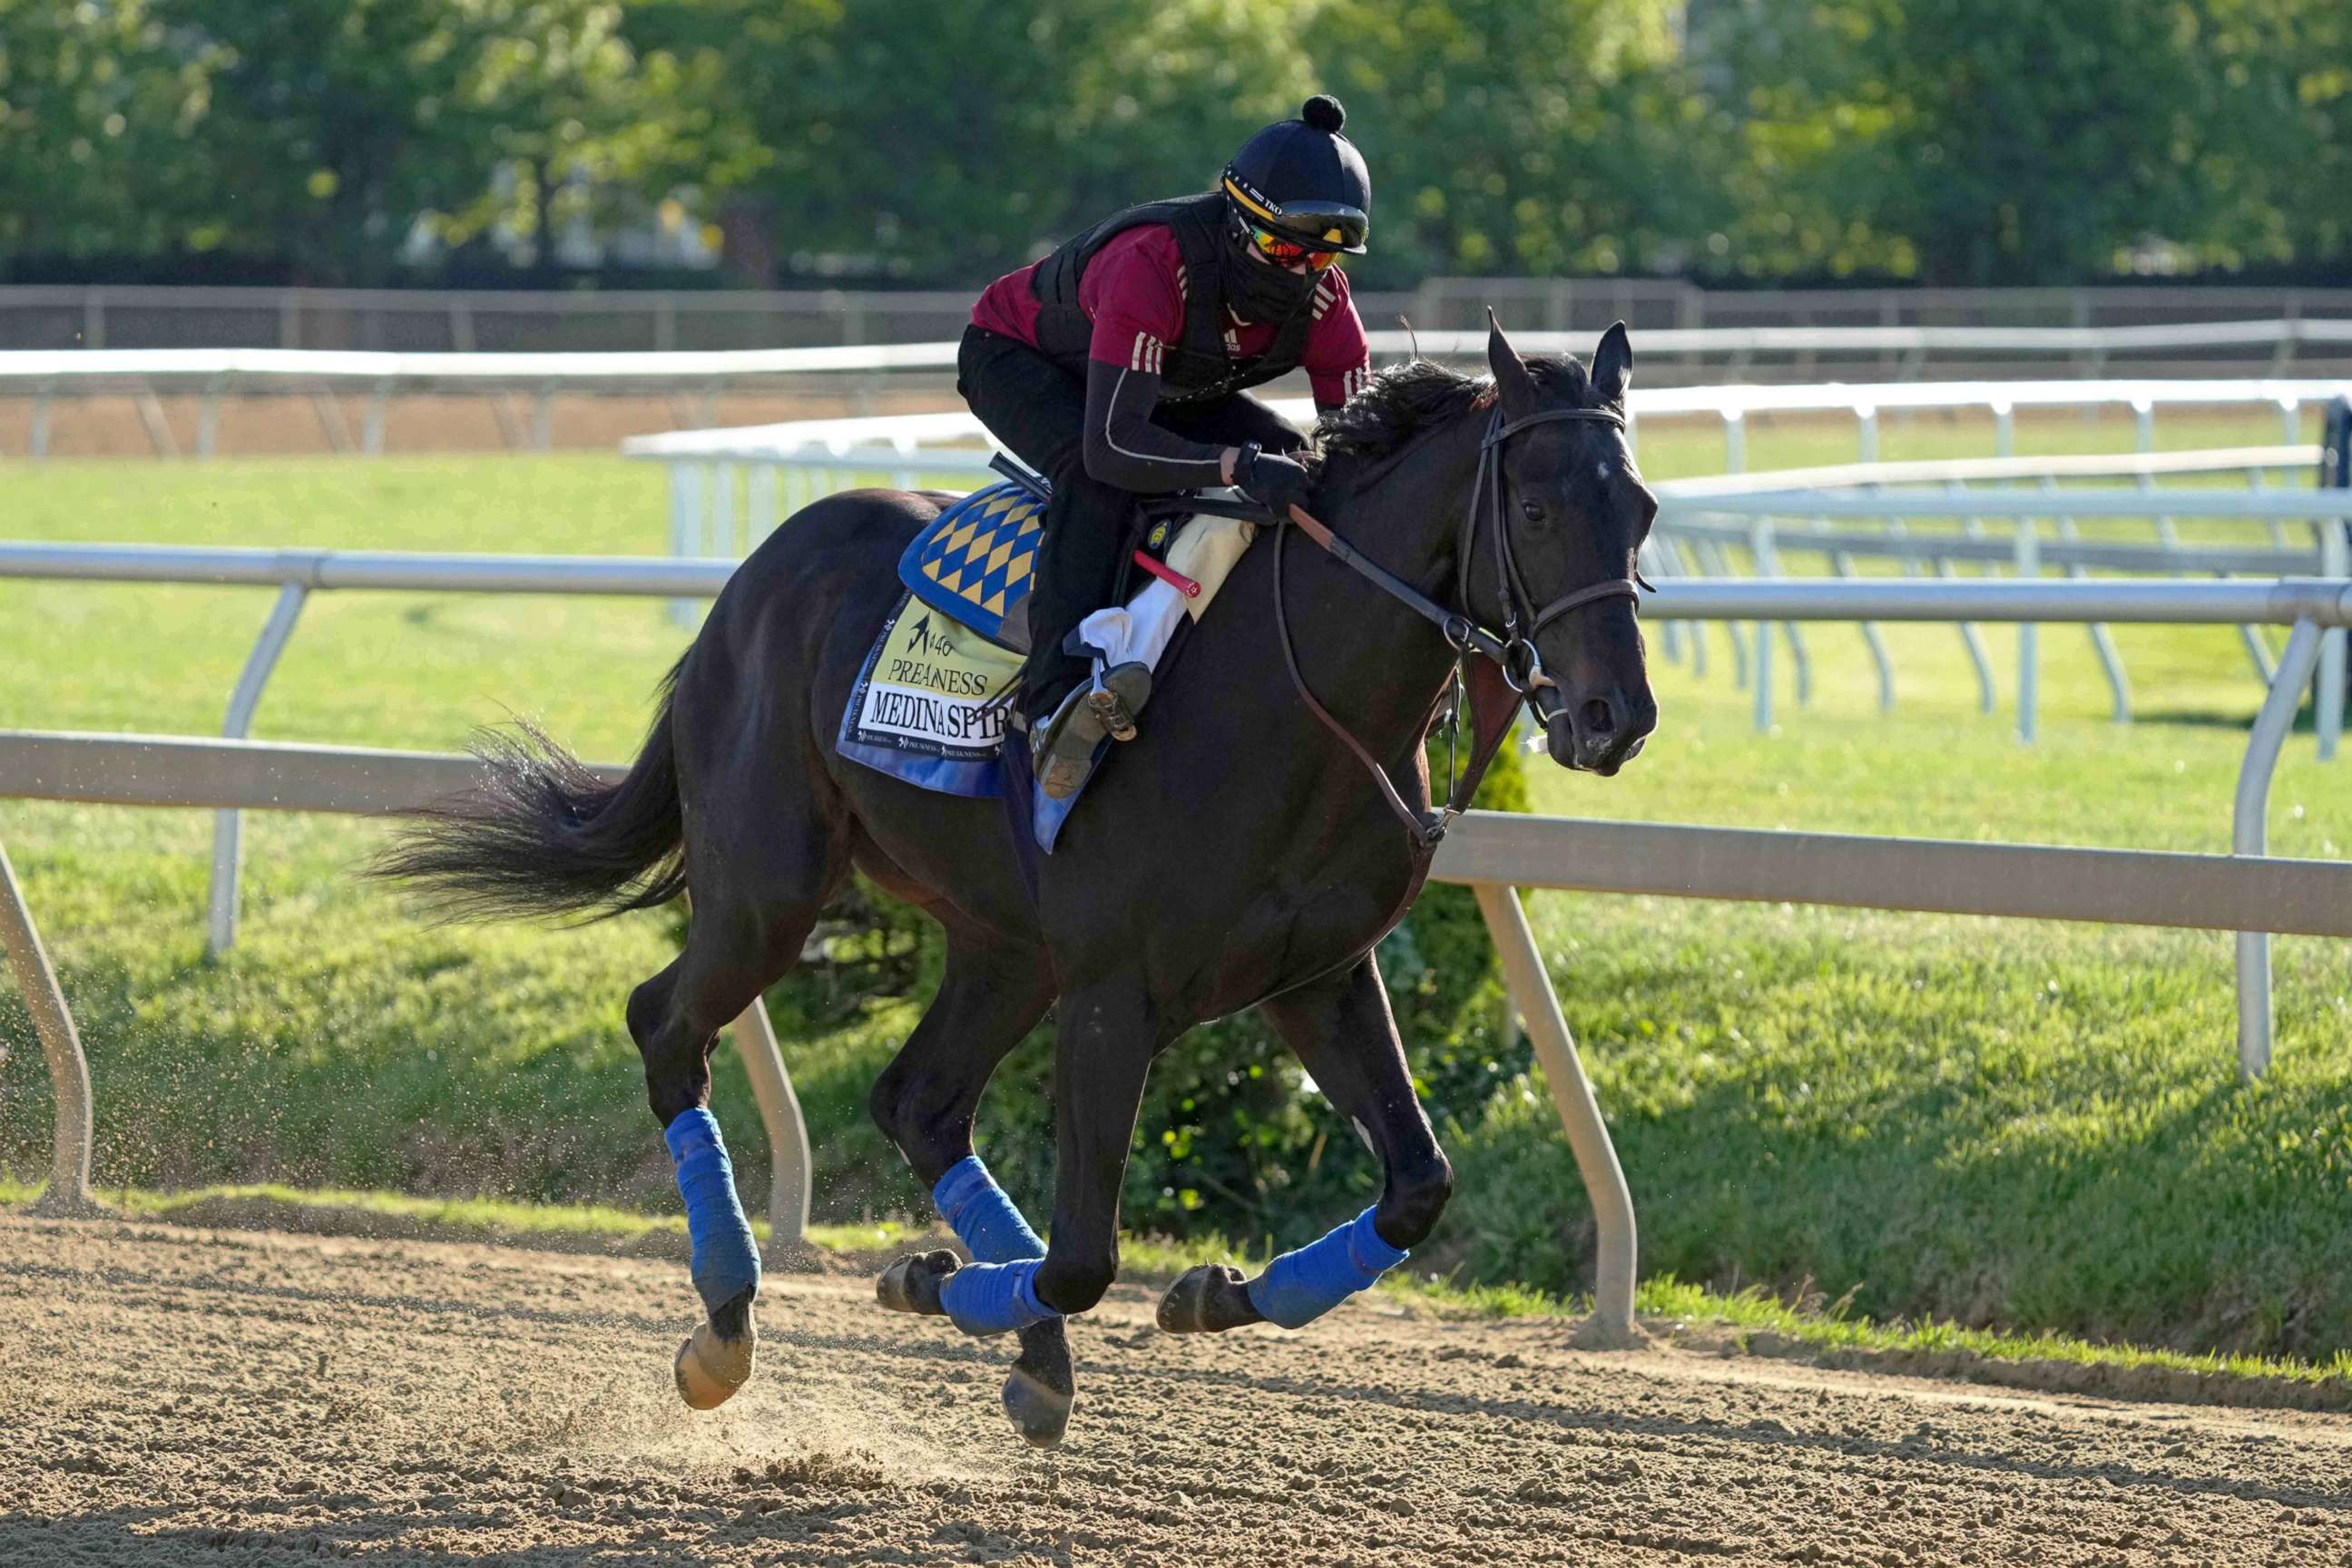 PHOTO: In this May 13, 2021, file photo, Medina Spirit runs during a morning workout at Pimlico Race Course in Baltimore.